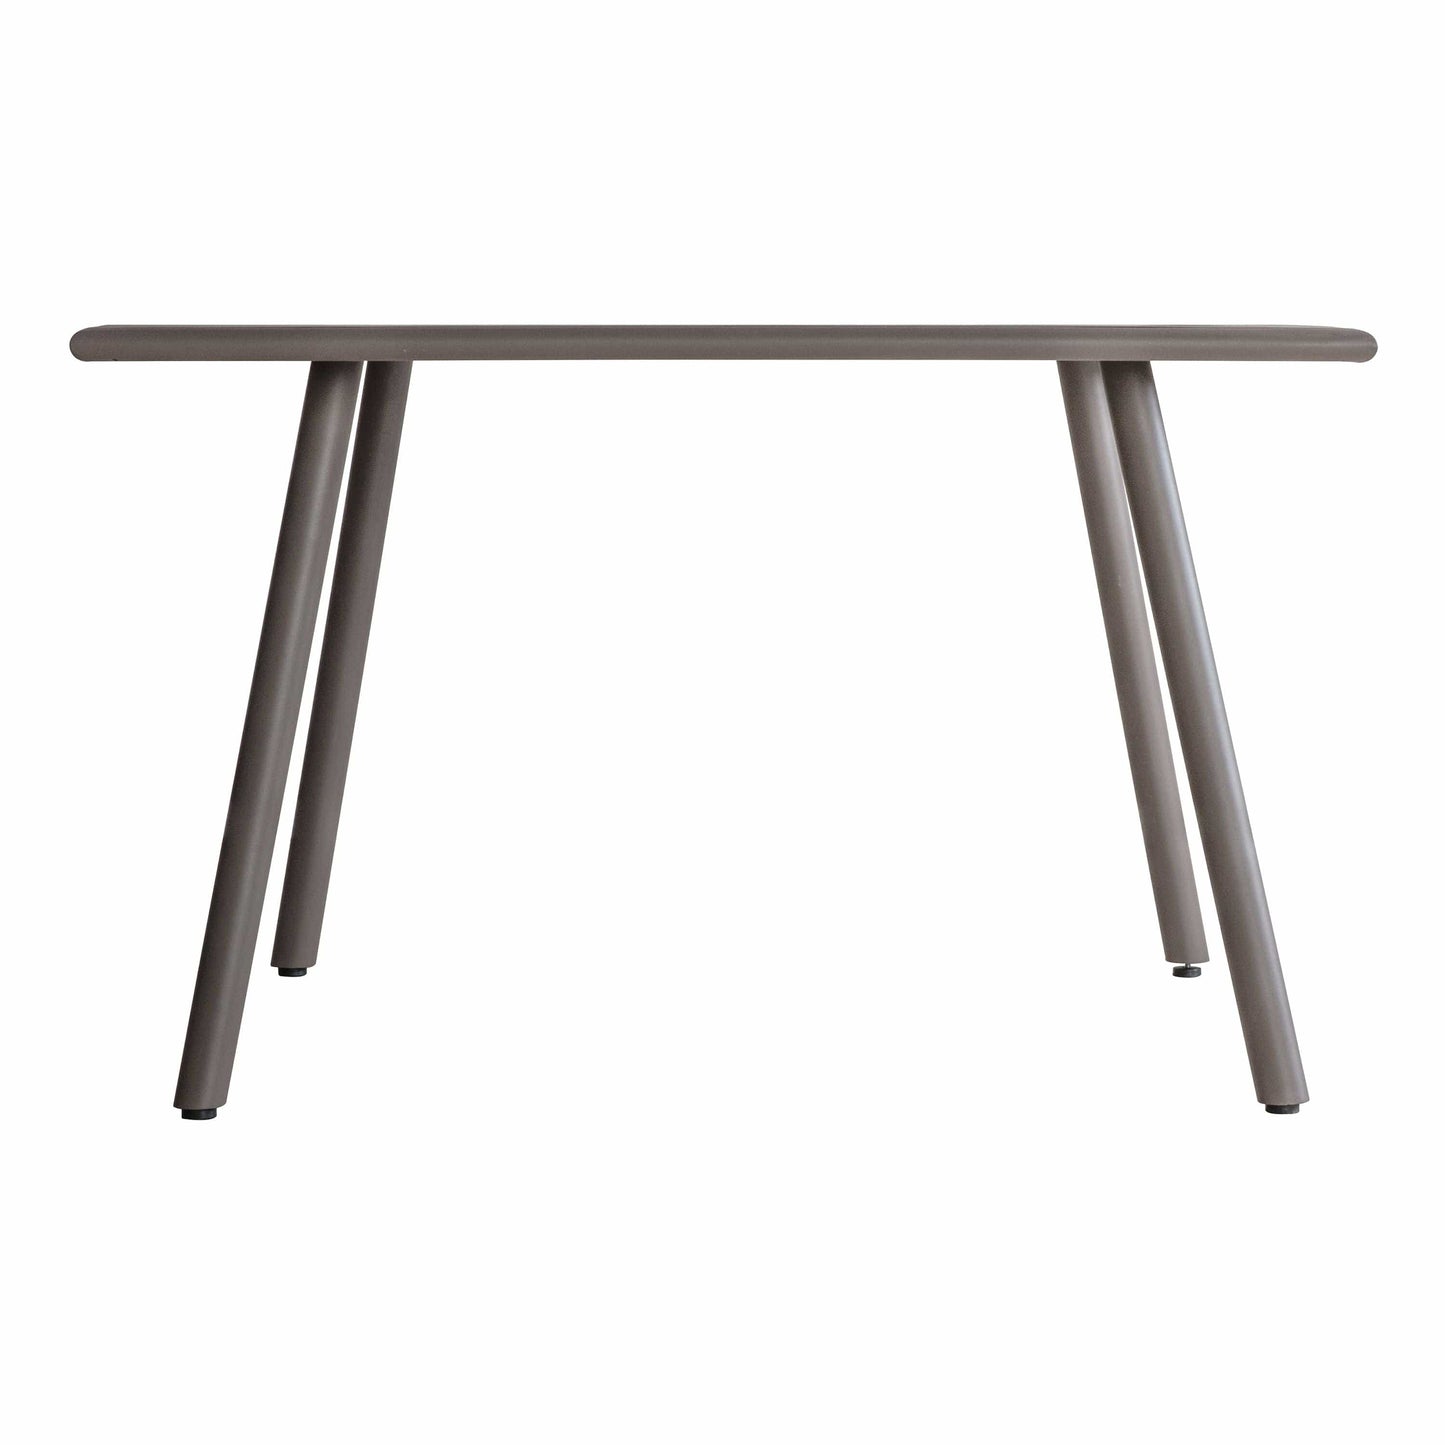 Keyworth Outdoor Table - Size Options